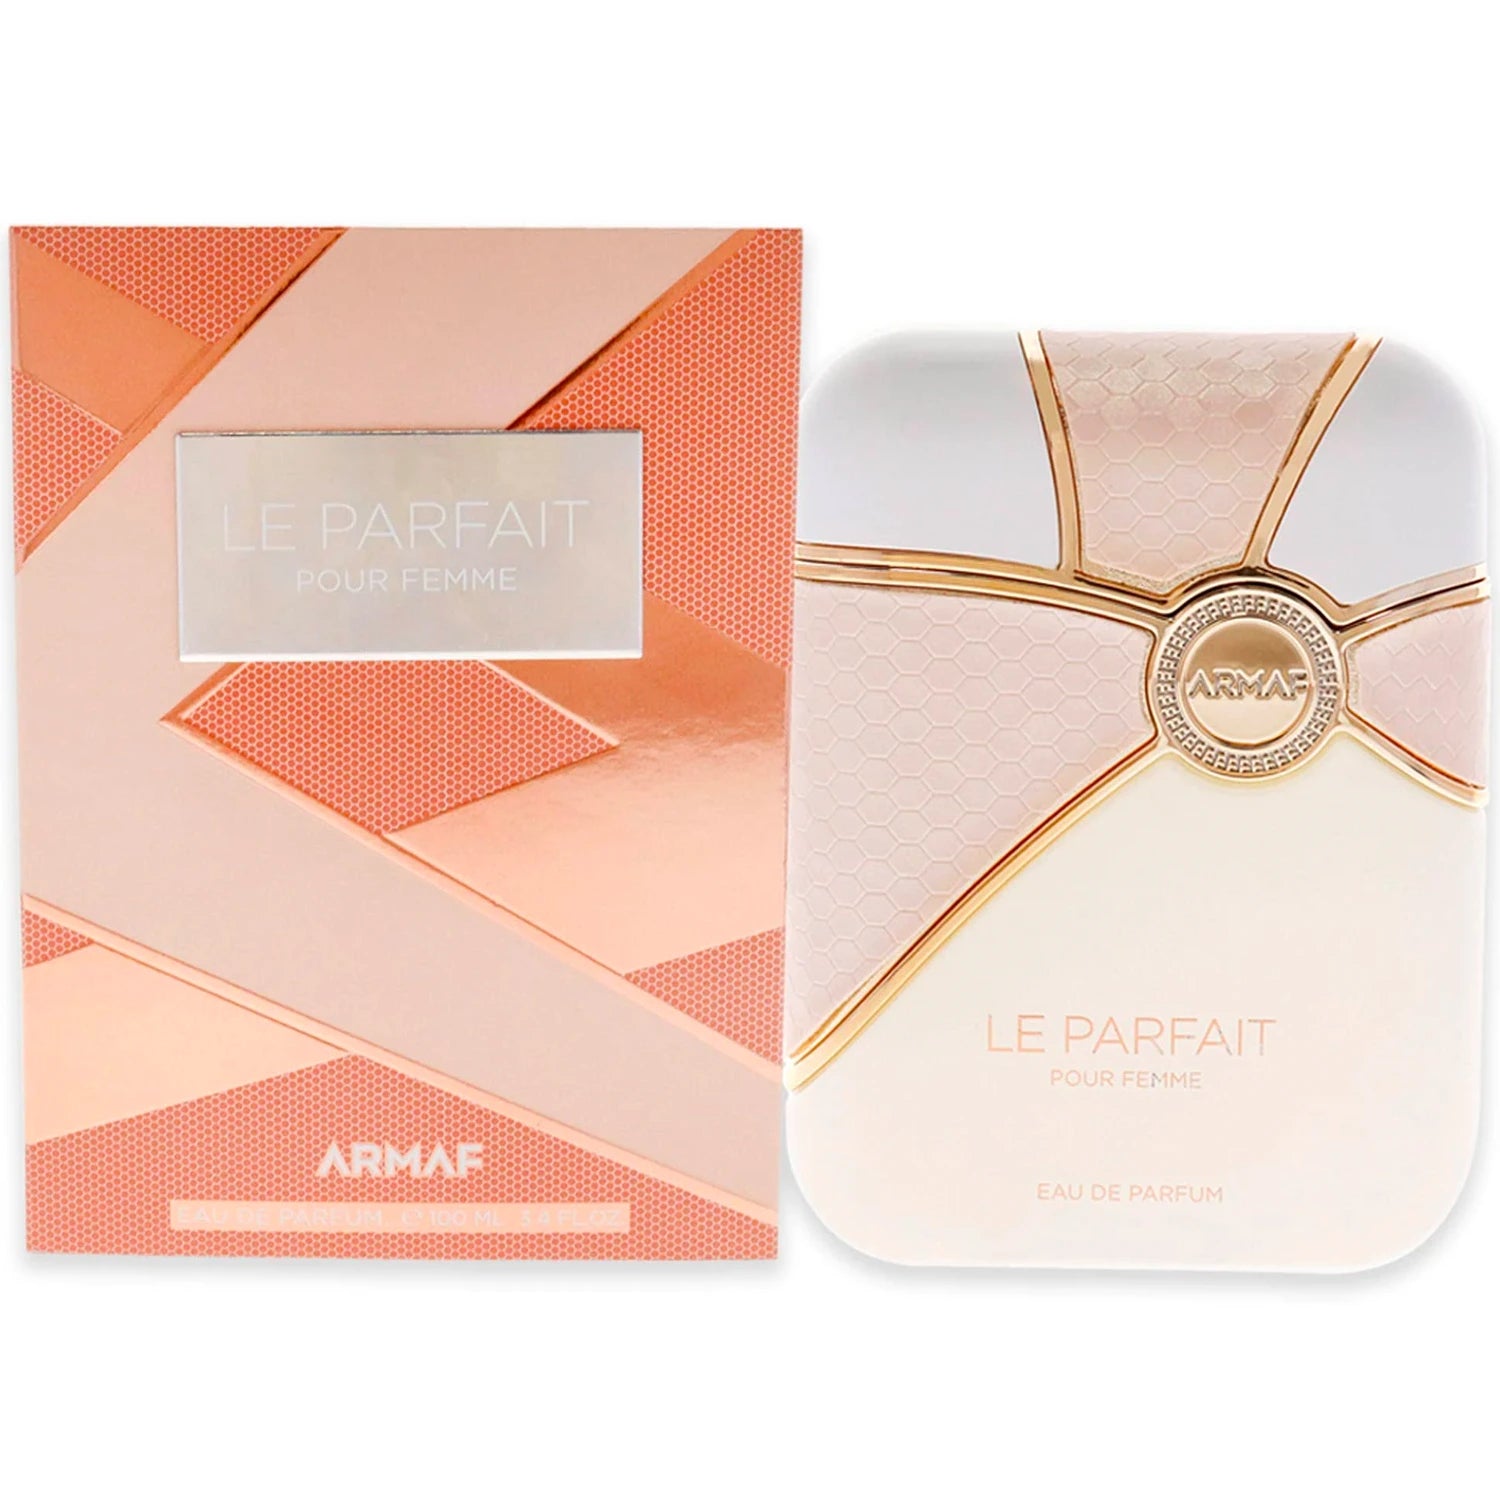 <p><em>﻿INSPIRED BY </em><strong>﻿CREED AVENTUS FOR HER</strong></p>
<p>Unleash your powerful femininity with ARMAF Le Parfait 6.8 oz EDP! This daring floral scent will draw attention with its top notes of Mandarin Orange, Neroli and Jasmine. Lively tuberose, luscious Honeysuckle and dreamy Lily-of-the-Valley make up its heart. Finish with a sensual base of Patchouli, Musk and Amber. Let its energizing aroma transport you to a world of daring femininity!</p>